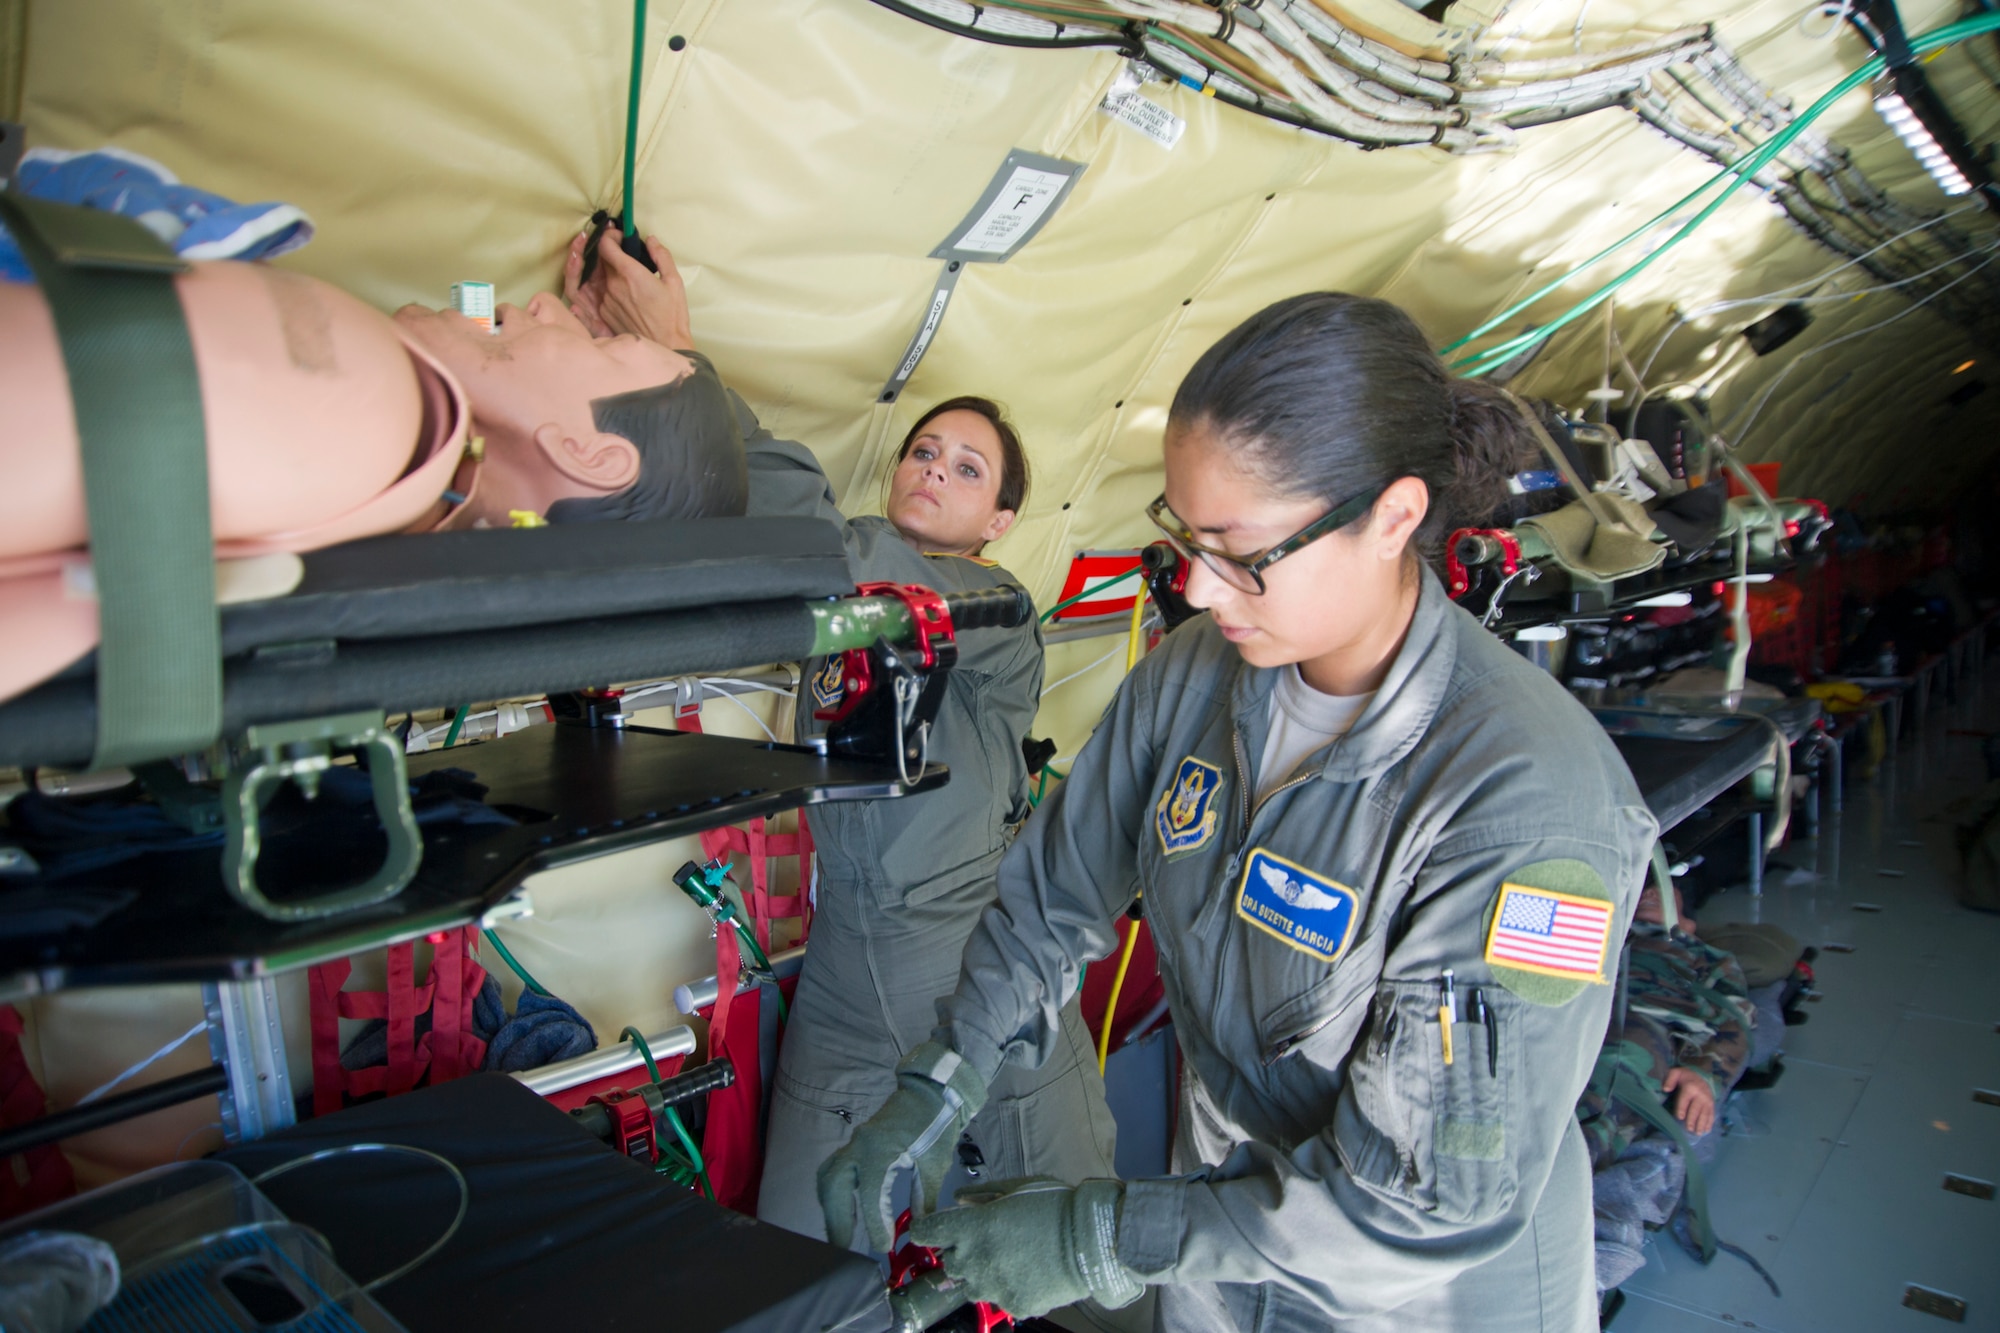 Members of the 459th Aeromedical Evacuation Squadron secure litters and oxygen lines prior to takeoff of a KC-135R Stratotanker on the Peterson Air Force Base, Colorado, flight line, Sunday, Aug. 28, 2016. More than a dozen 459th AES flight nurses, technicians and administrators flew to Peterson to conduct joint unit training with other AE squadrons on board the KC-135, C-17 Globemaster III and C-130H3 Hercules. (U.S. Air Force photo/Staff Sgt. Kat Justen)